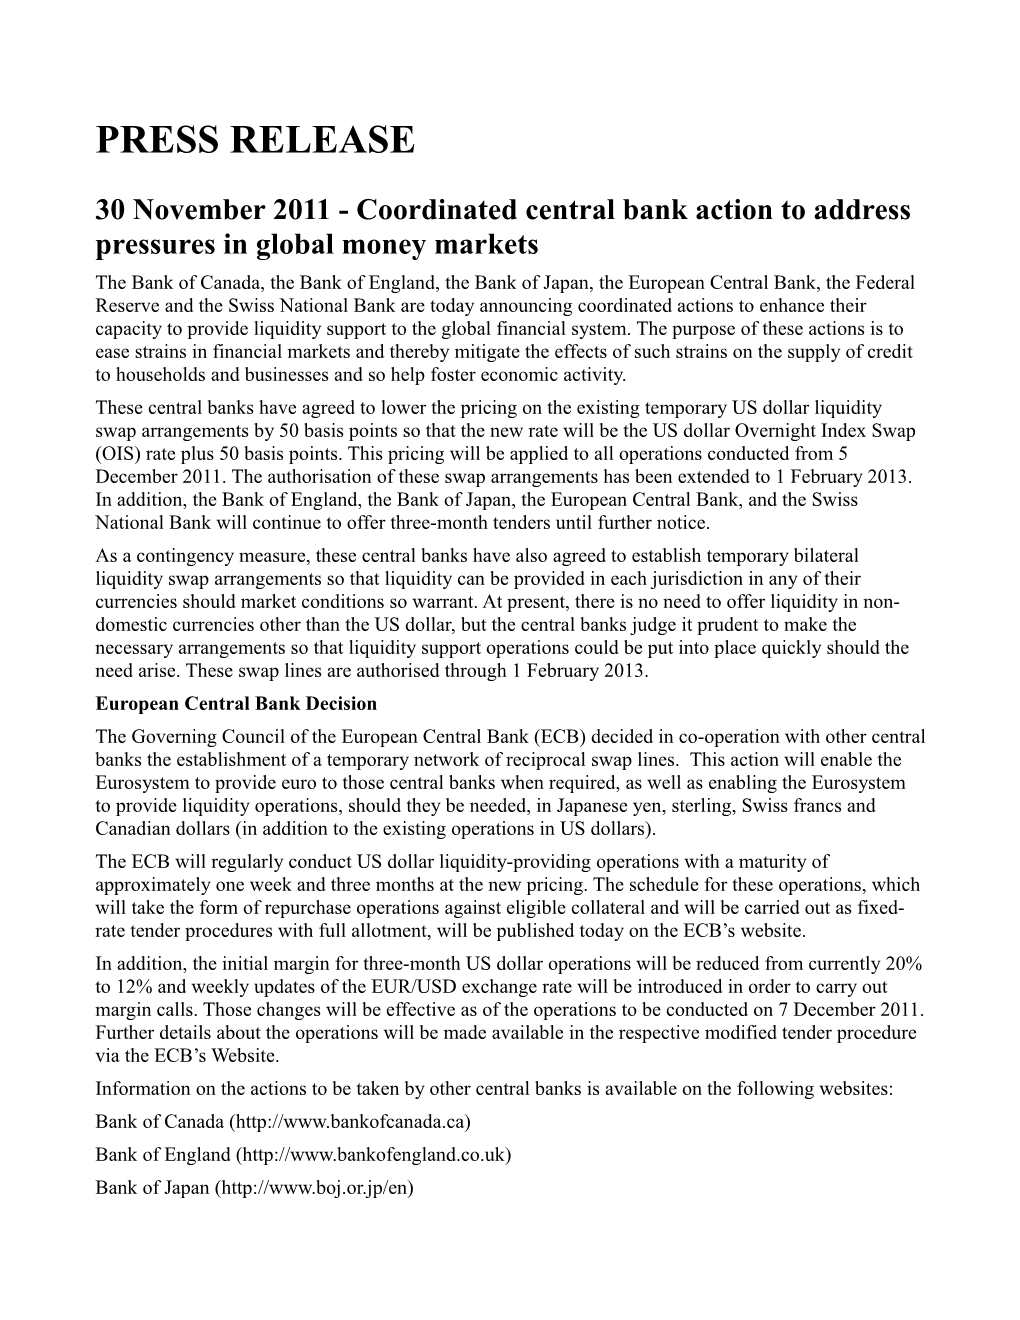 30 November 2011 - Coordinated Central Bank Action to Address Pressures in Global Money Markets